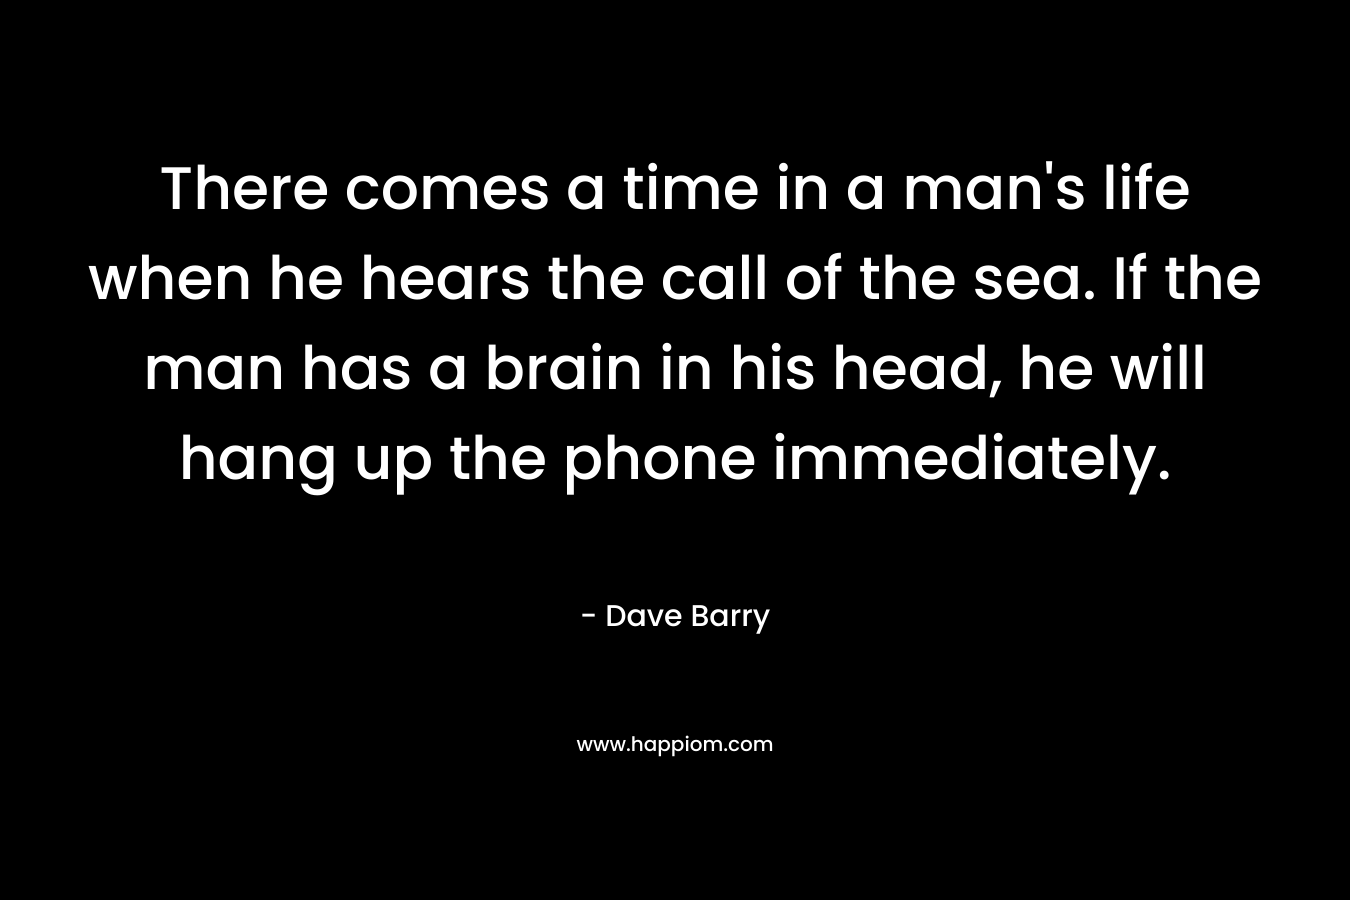 There comes a time in a man’s life when he hears the call of the sea. If the man has a brain in his head, he will hang up the phone immediately. – Dave Barry